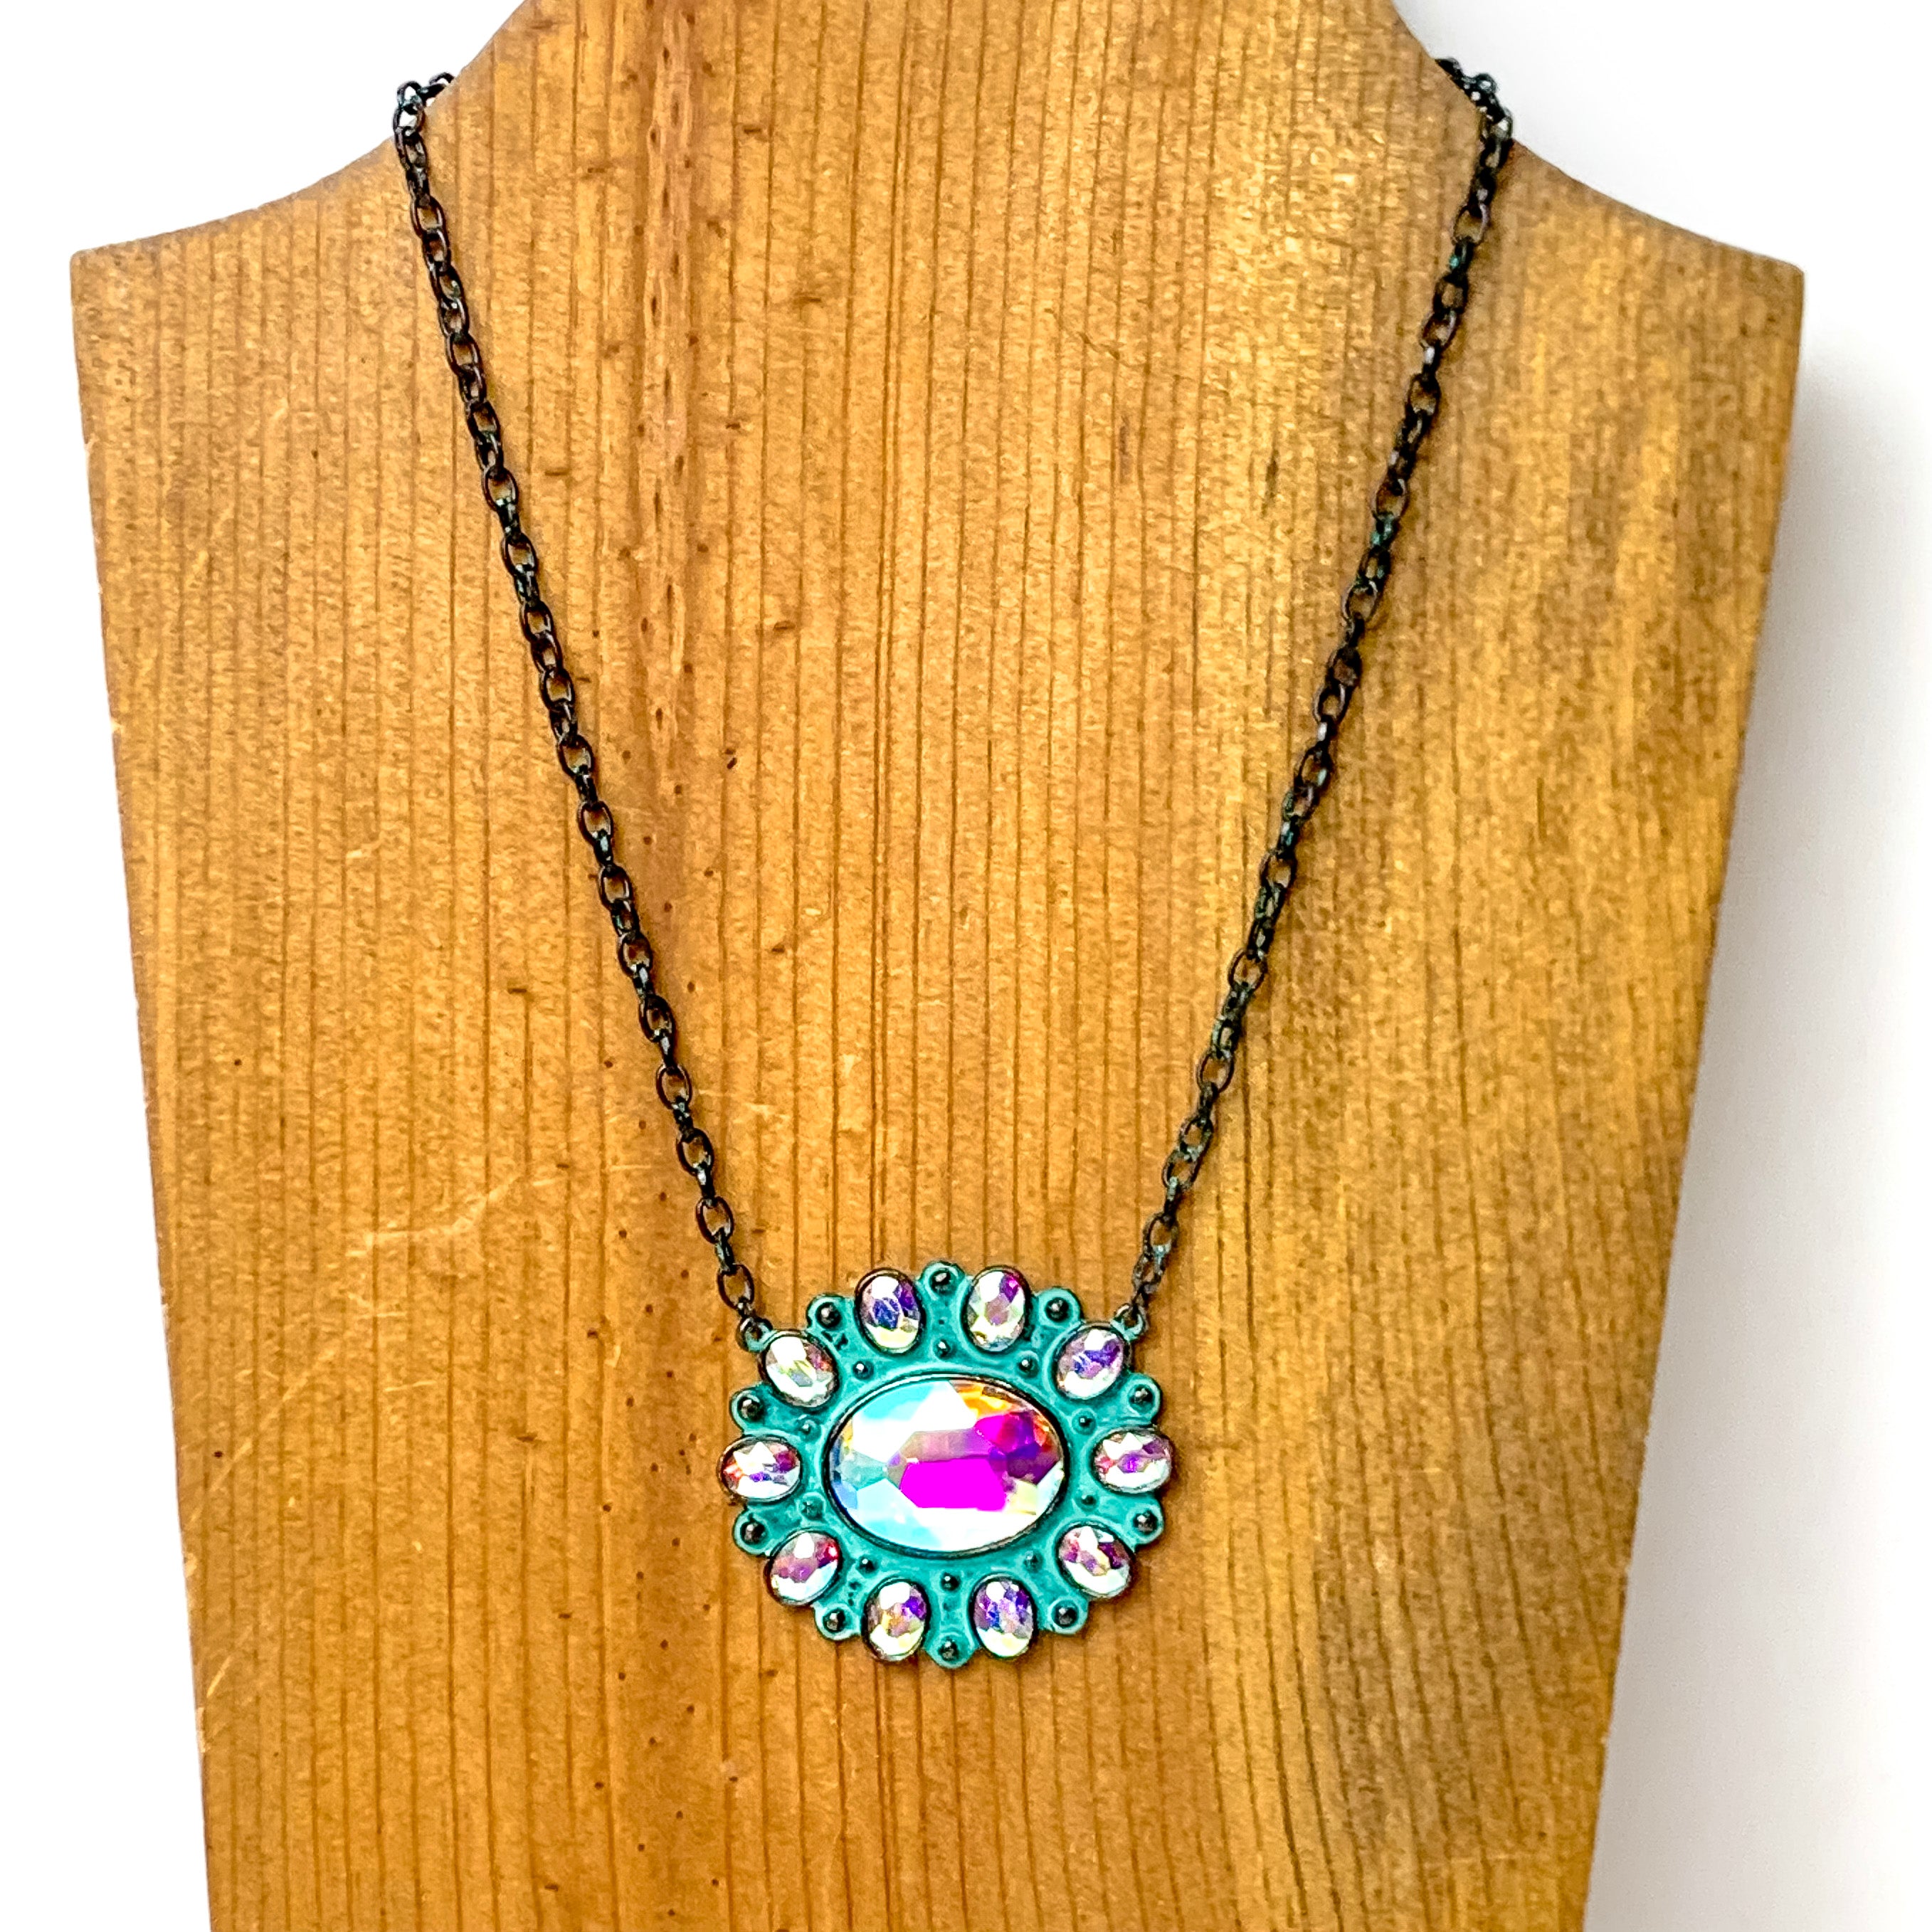 Desert Diva Concho Necklace in Patina Tone - Giddy Up Glamour Boutique